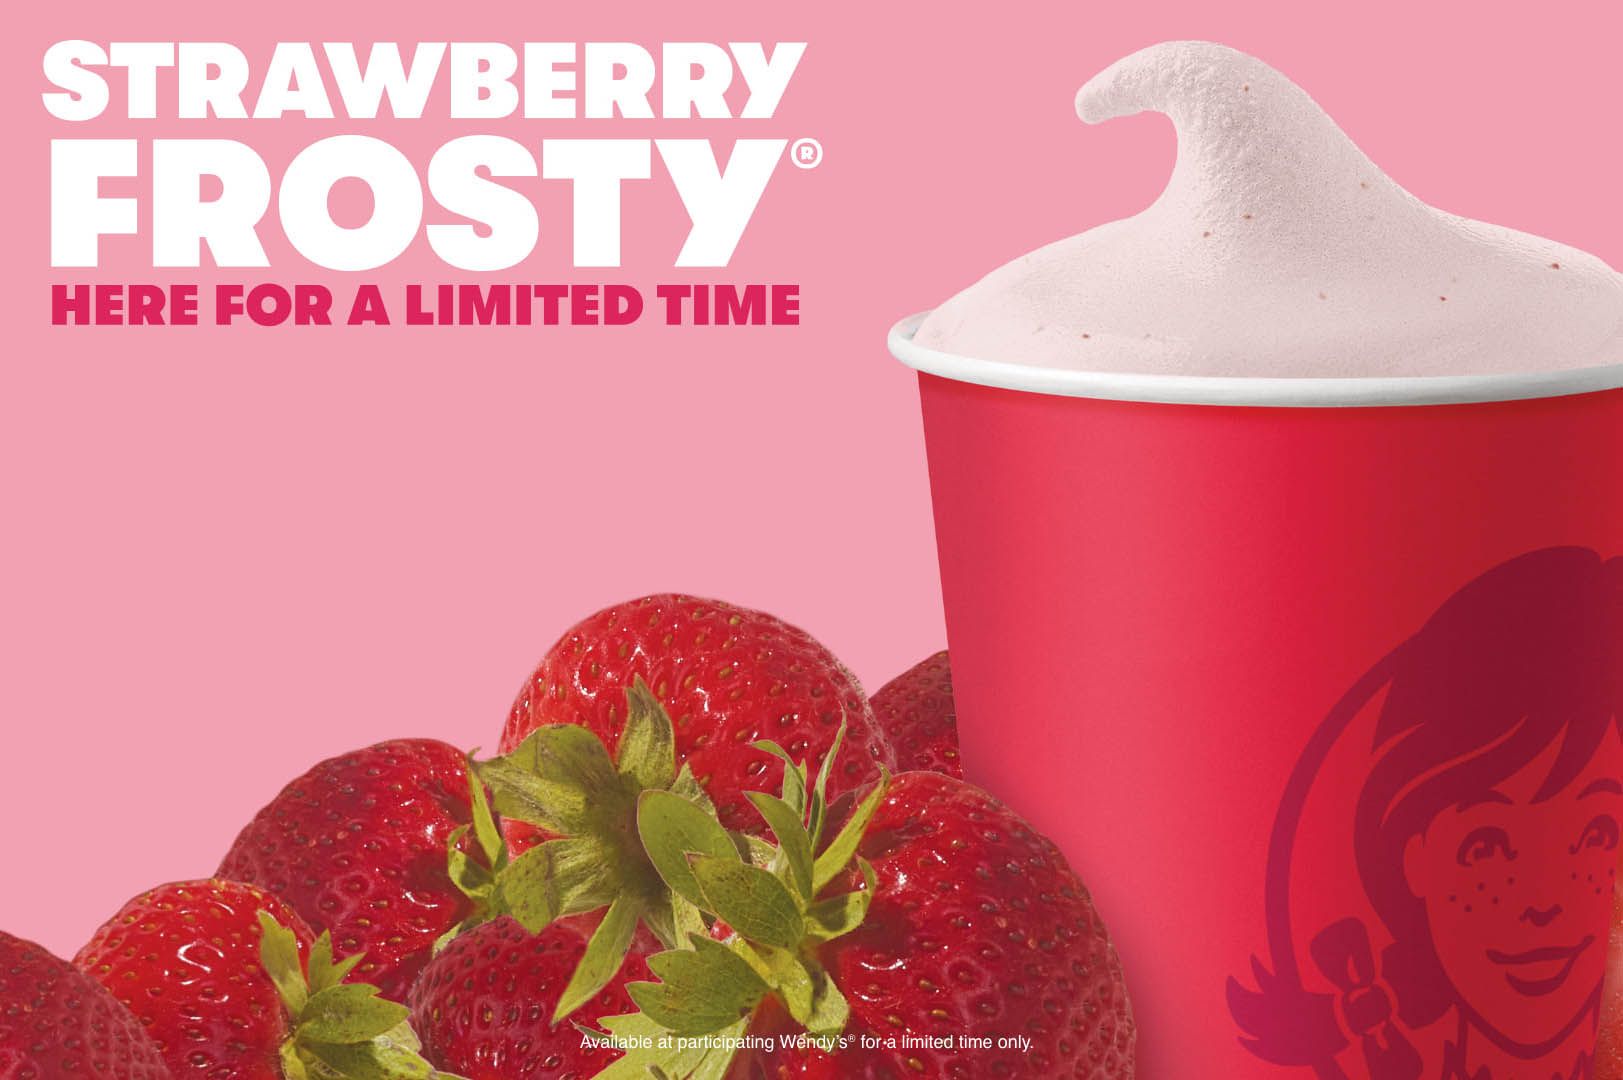 The New Strawberry Frosty Arrives at Wendy’s for a Limited Time 